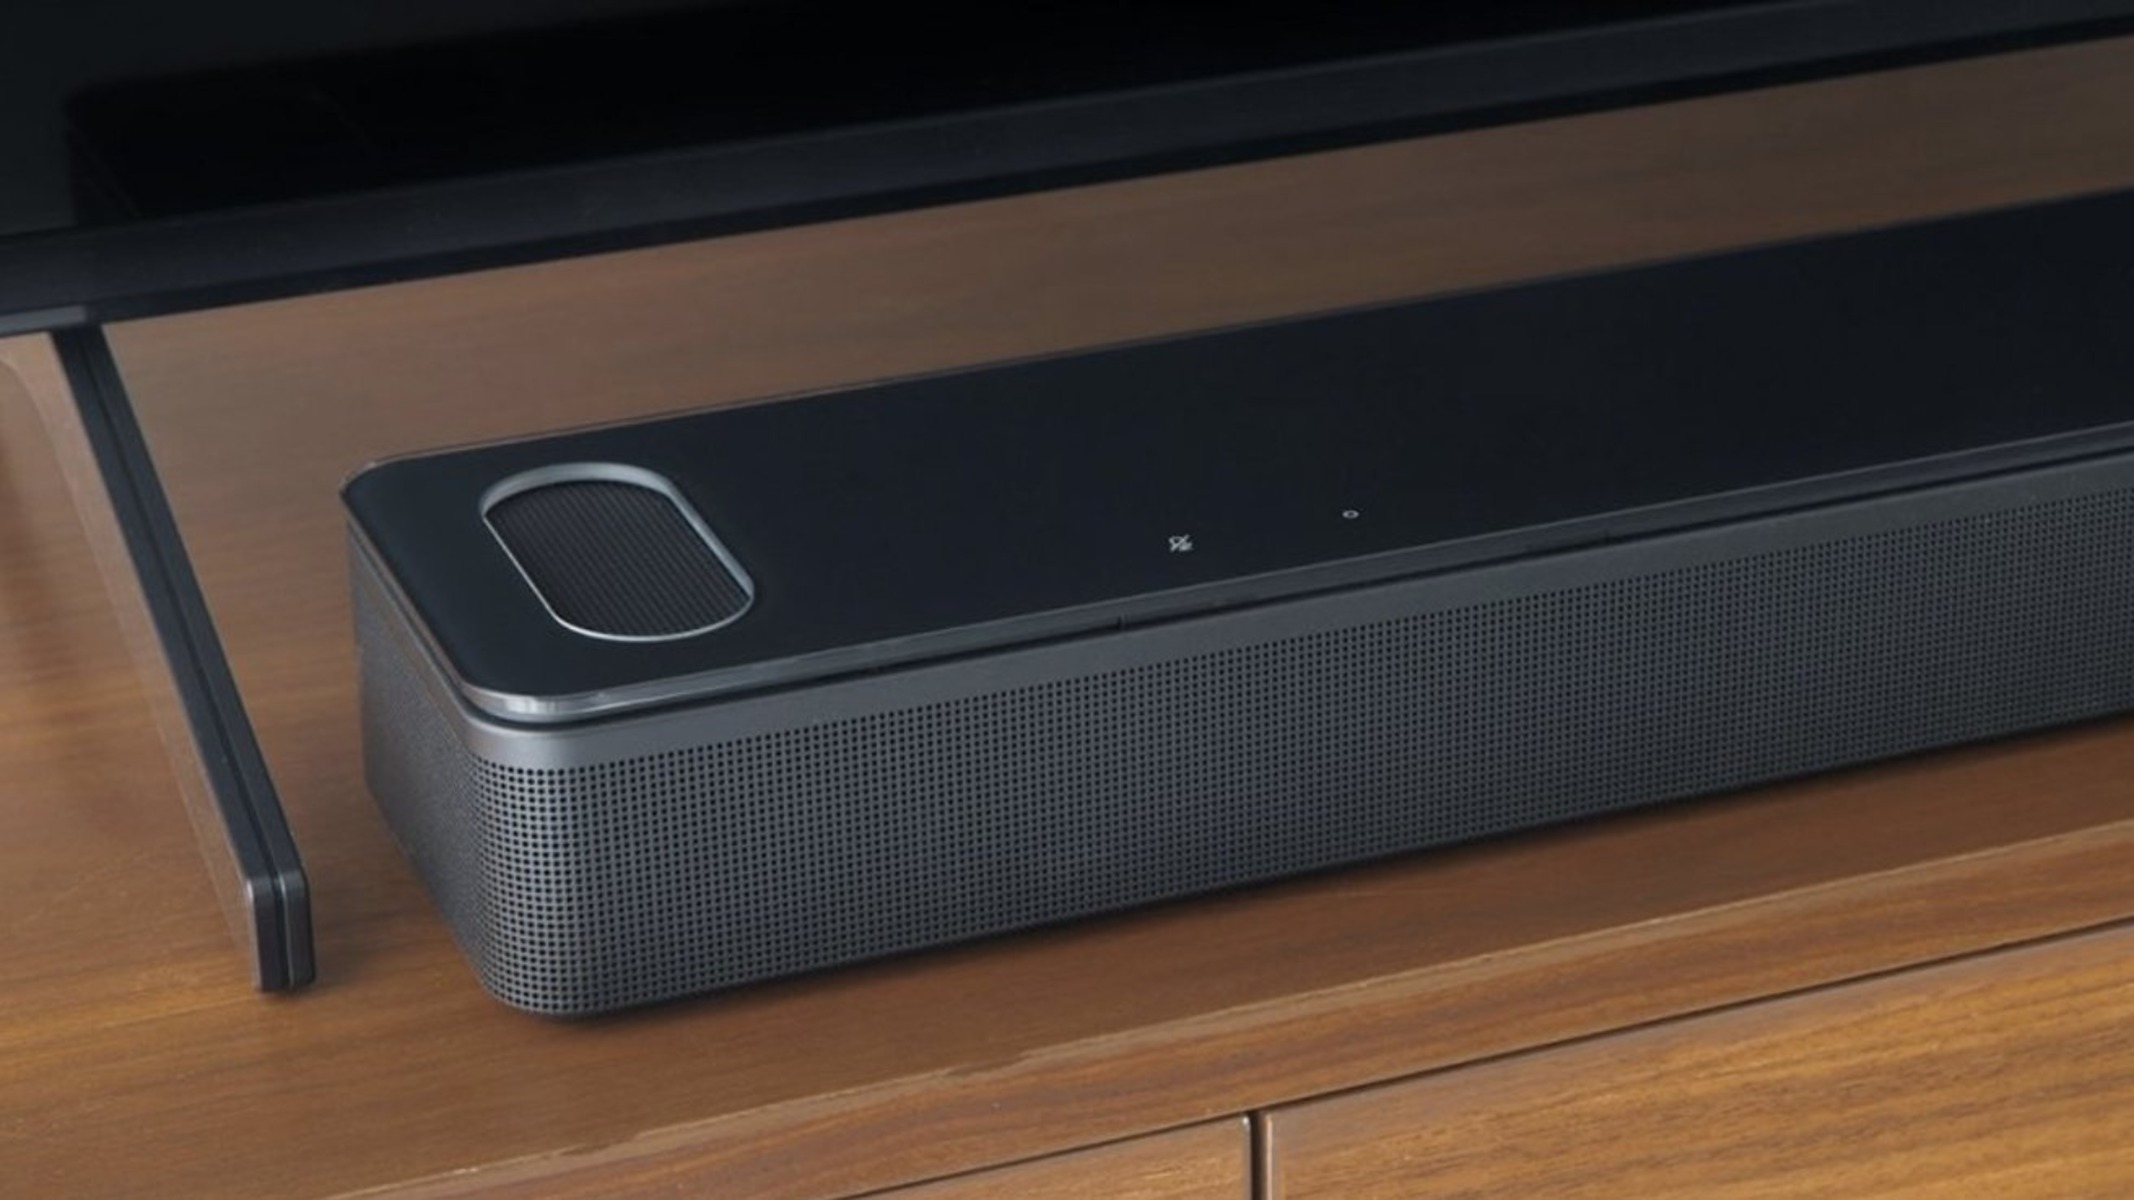 How To Turn On A Bose Soundbar Without A Remote